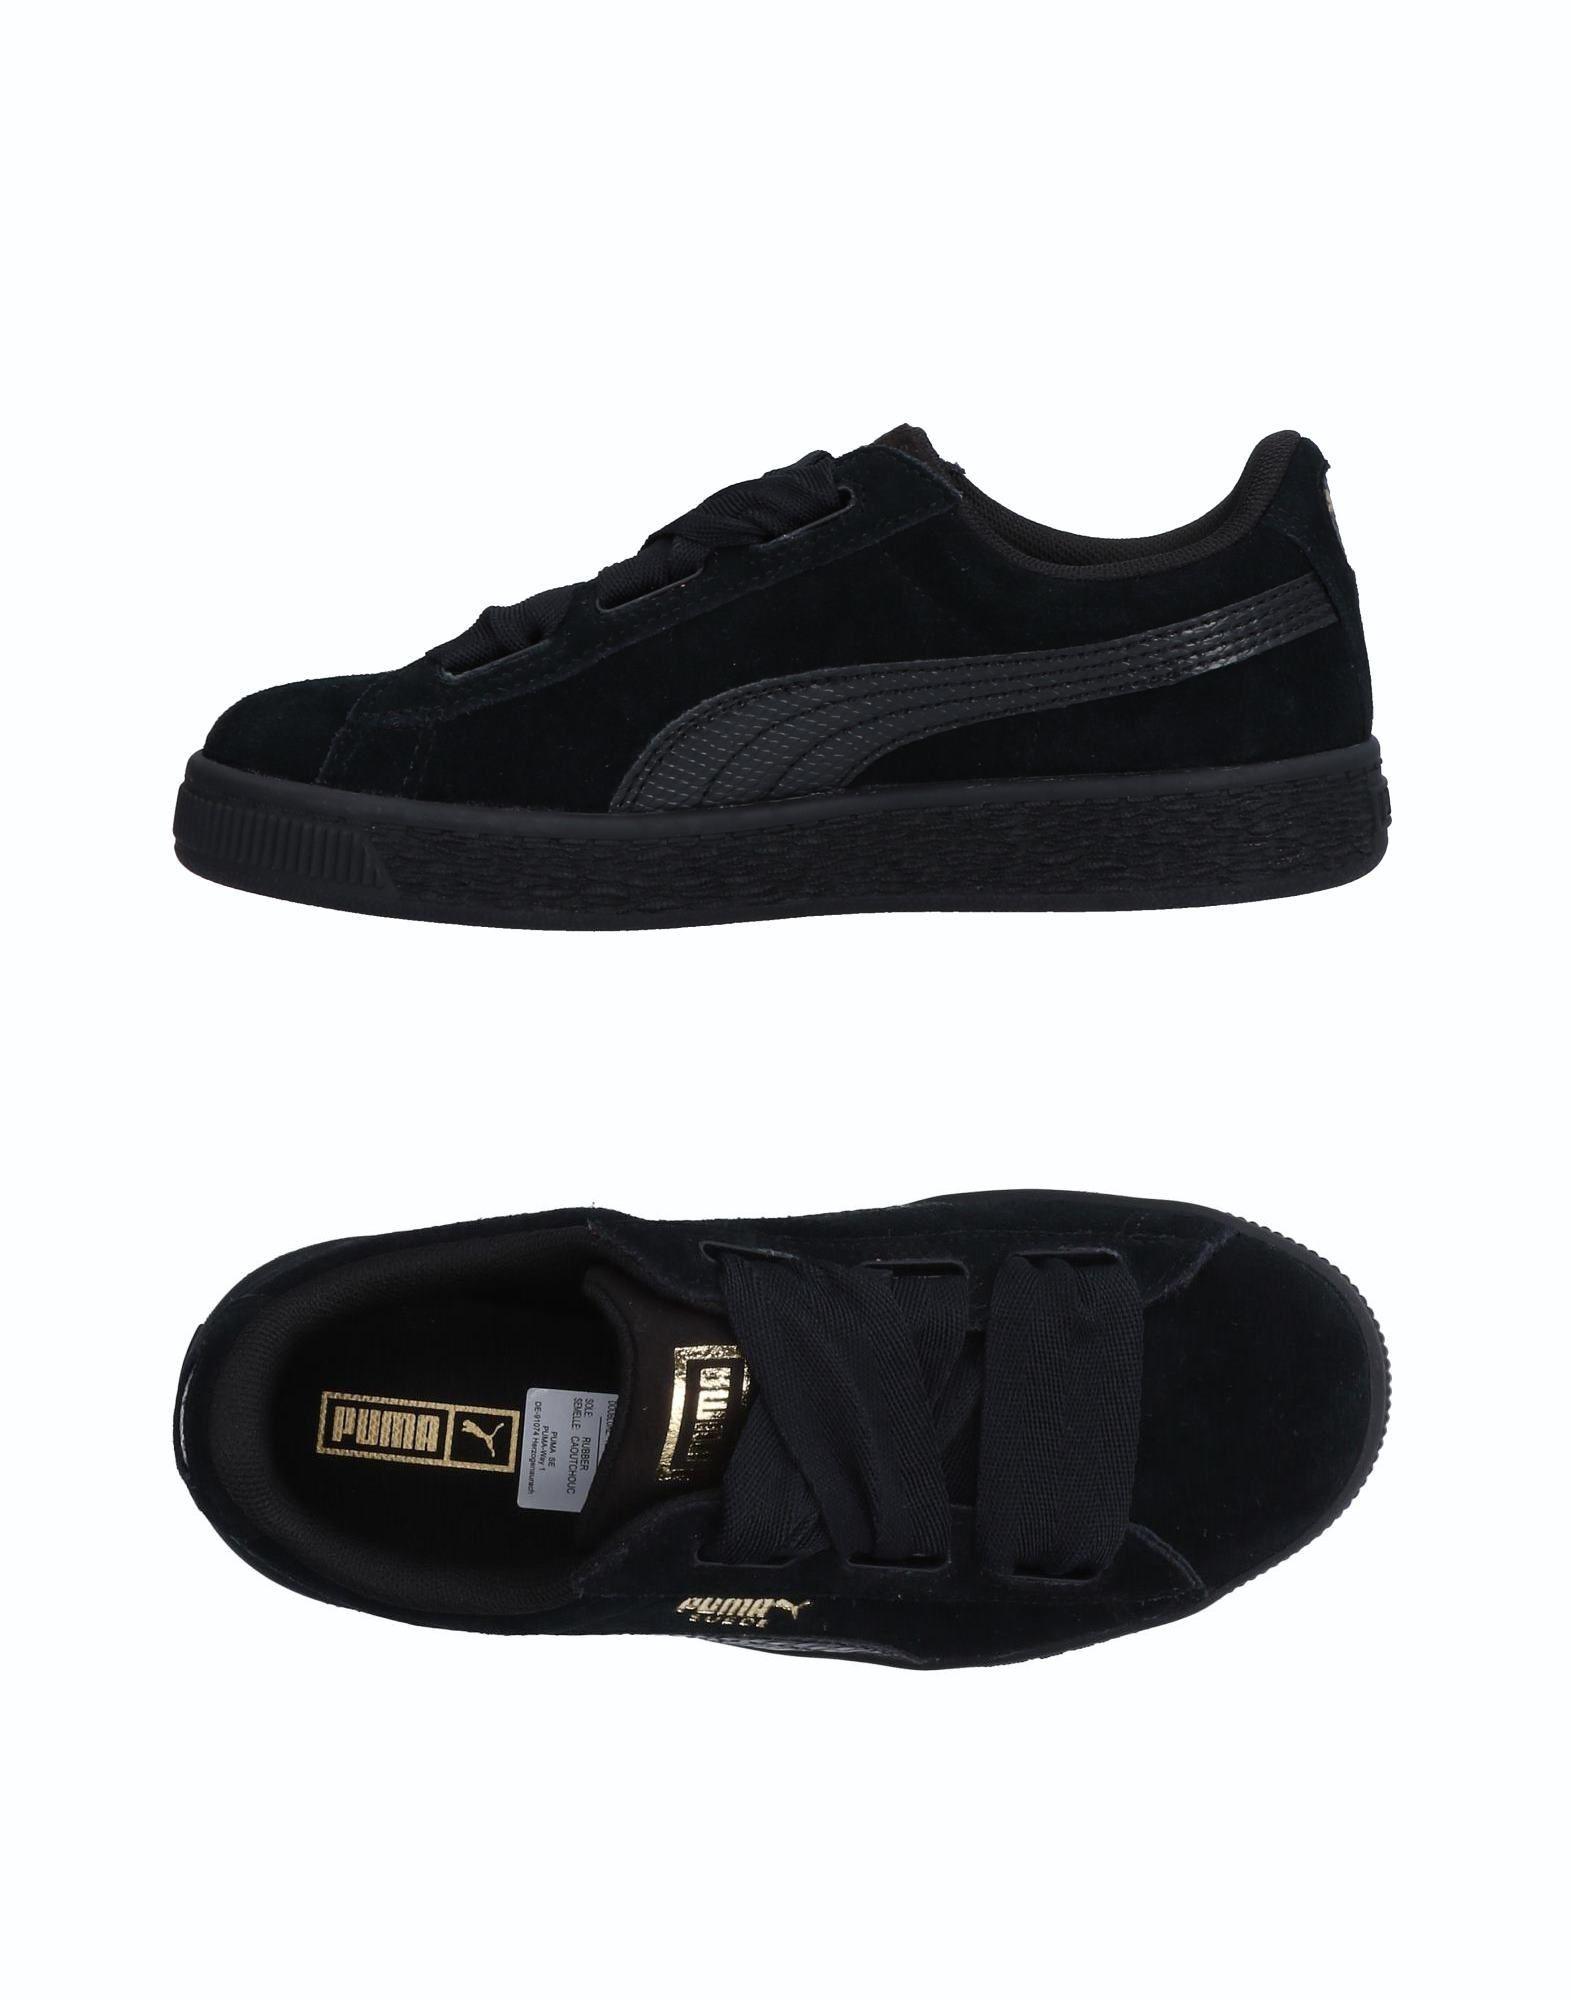 Puma Way1 Outlet, 57% OFF | www.hcb.cat